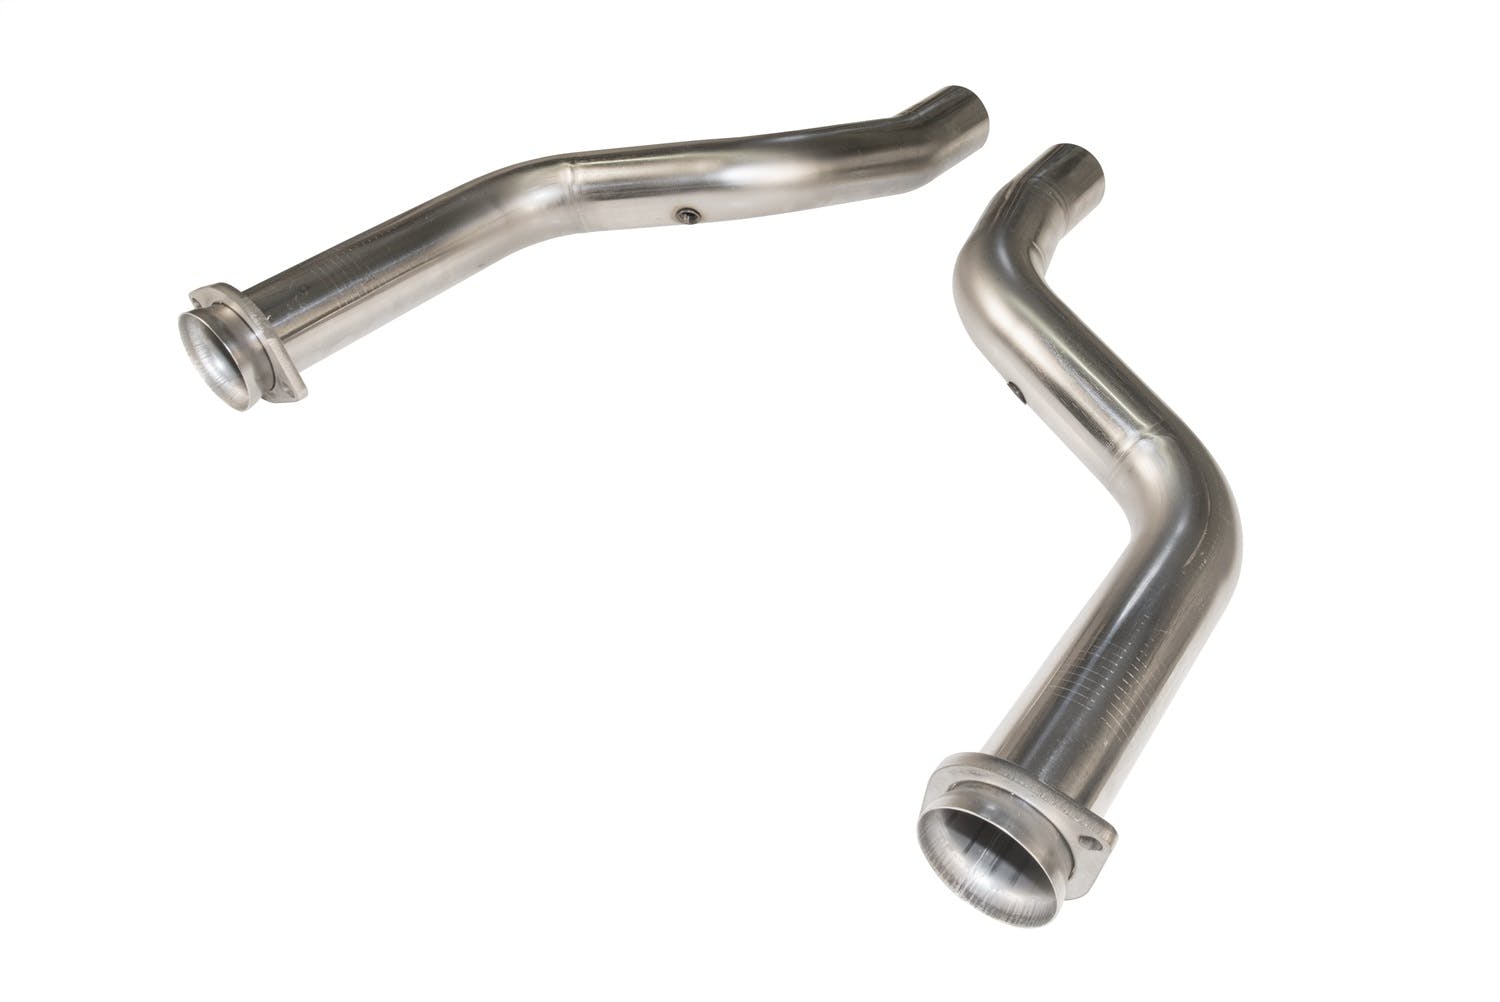 Kooks Custom Headers 31013110 Off Road Connection Pipes